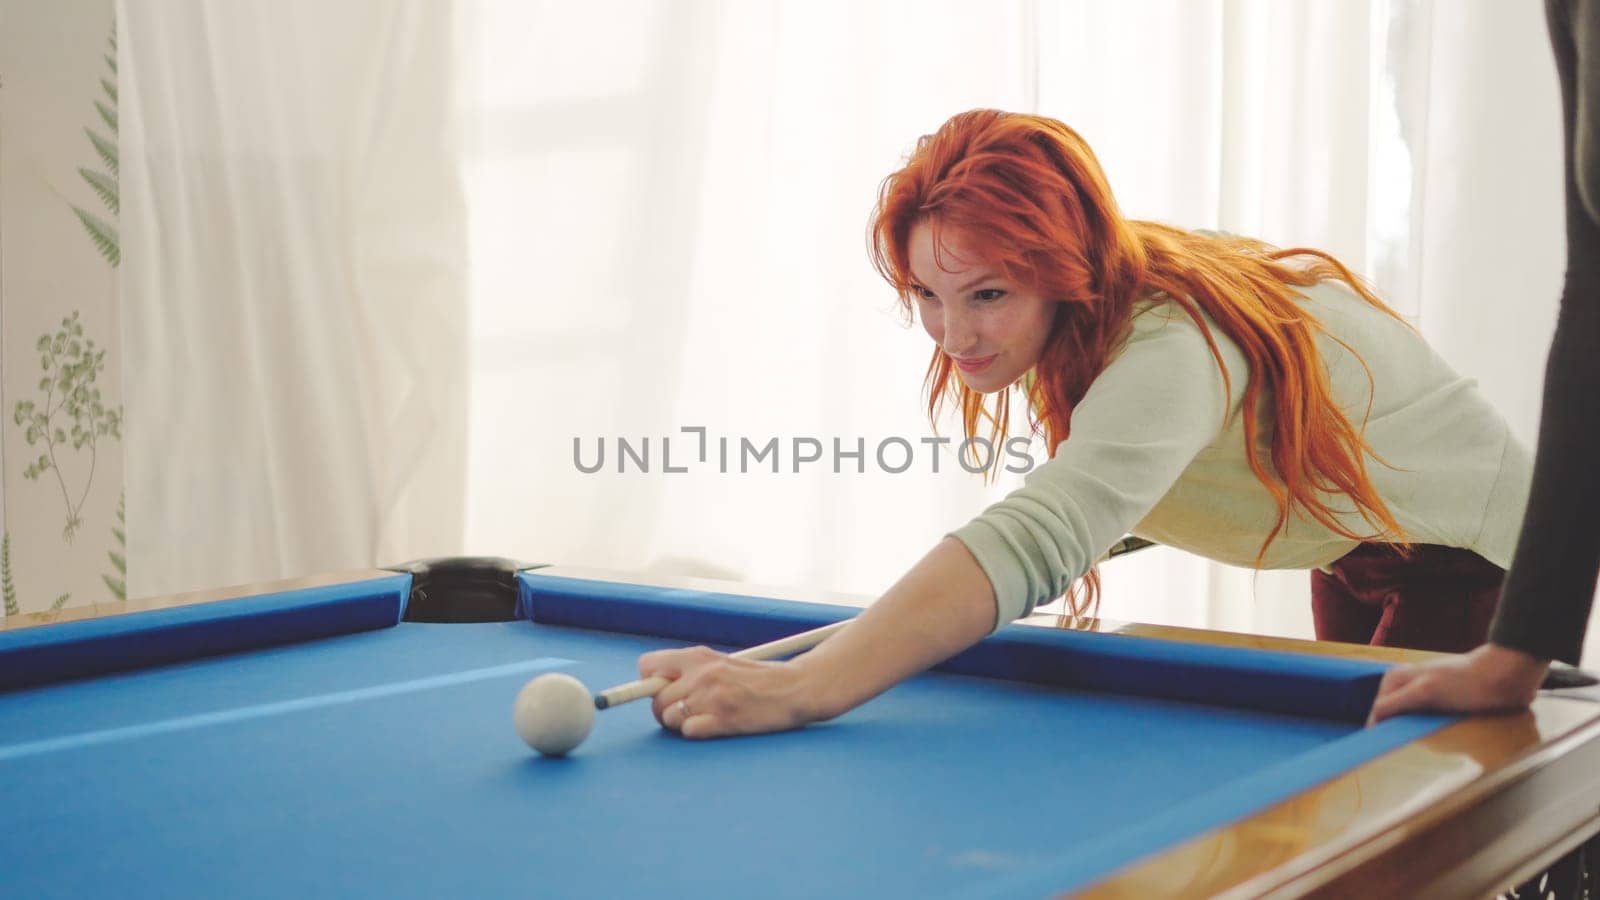 Concentrated woman hitting a pool ball playing with friends by ivanmoreno